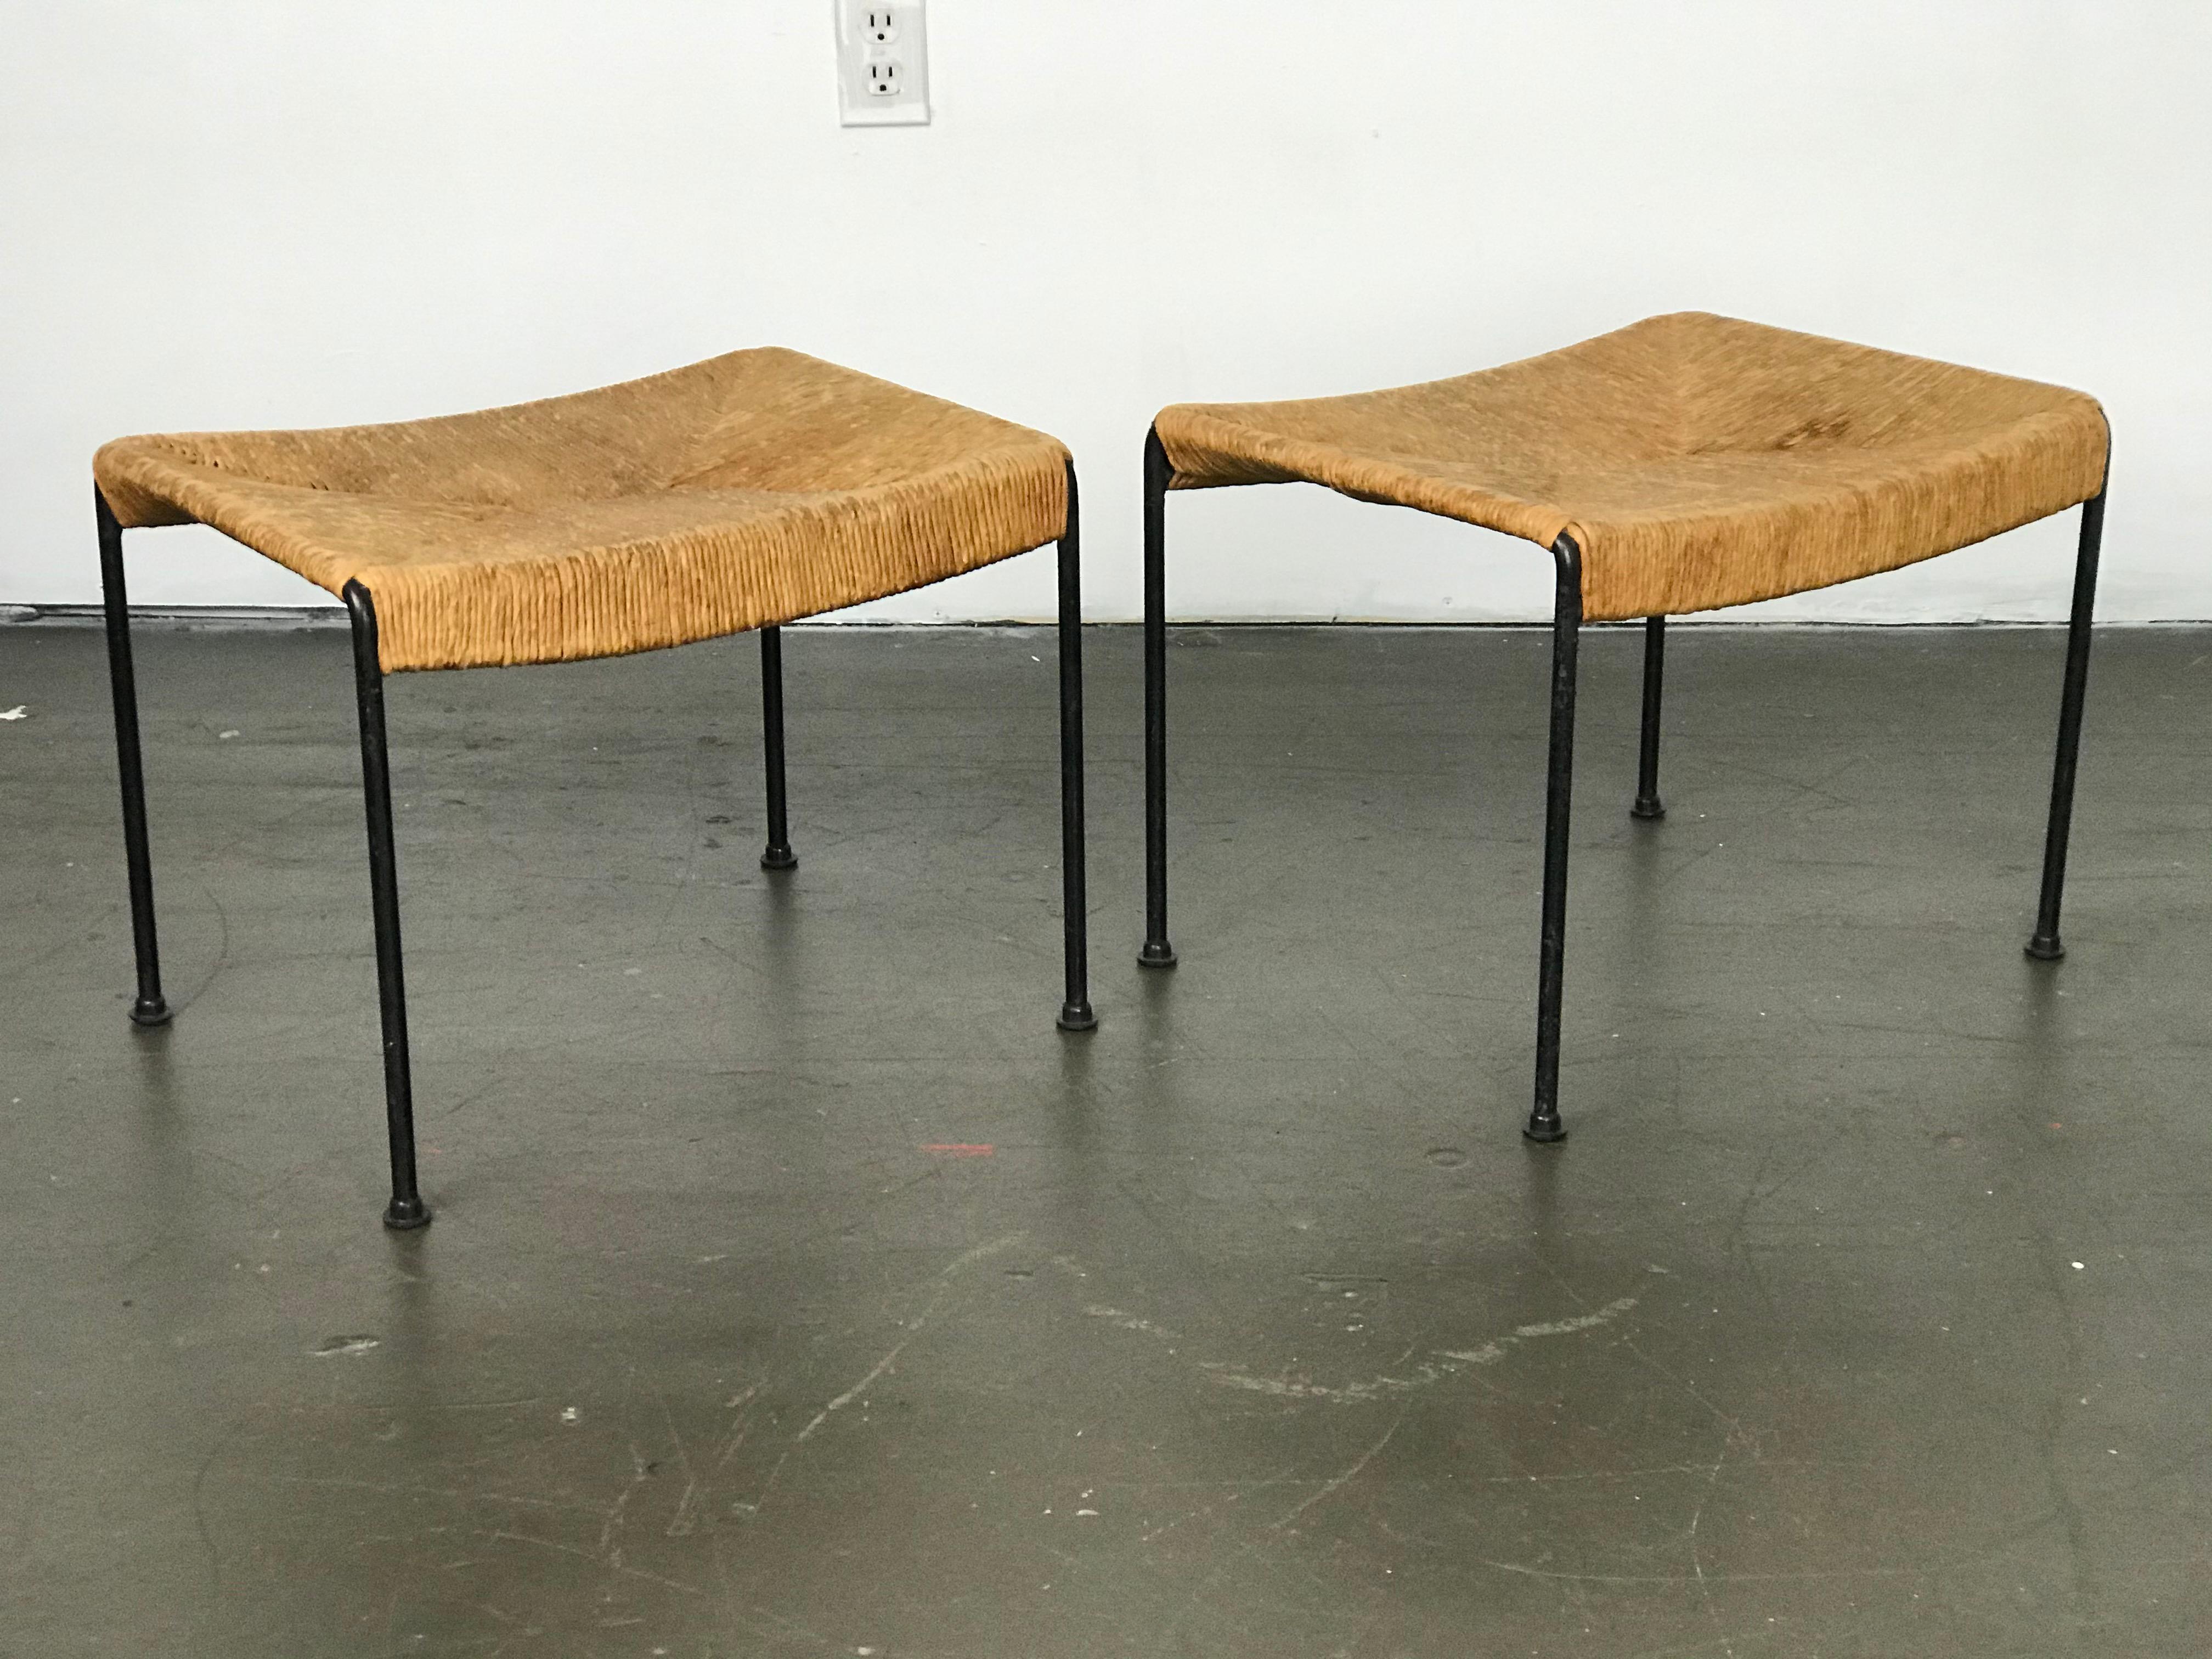 Set of two Minimalist footrests or stools by Arthur Umanoff for Shaver Howard, 1950s. Made of papercord rope and iron. Original condition. Areas of wear on the rope and iron. These pair nicely (or one of them) with the Umanoff settee I have for